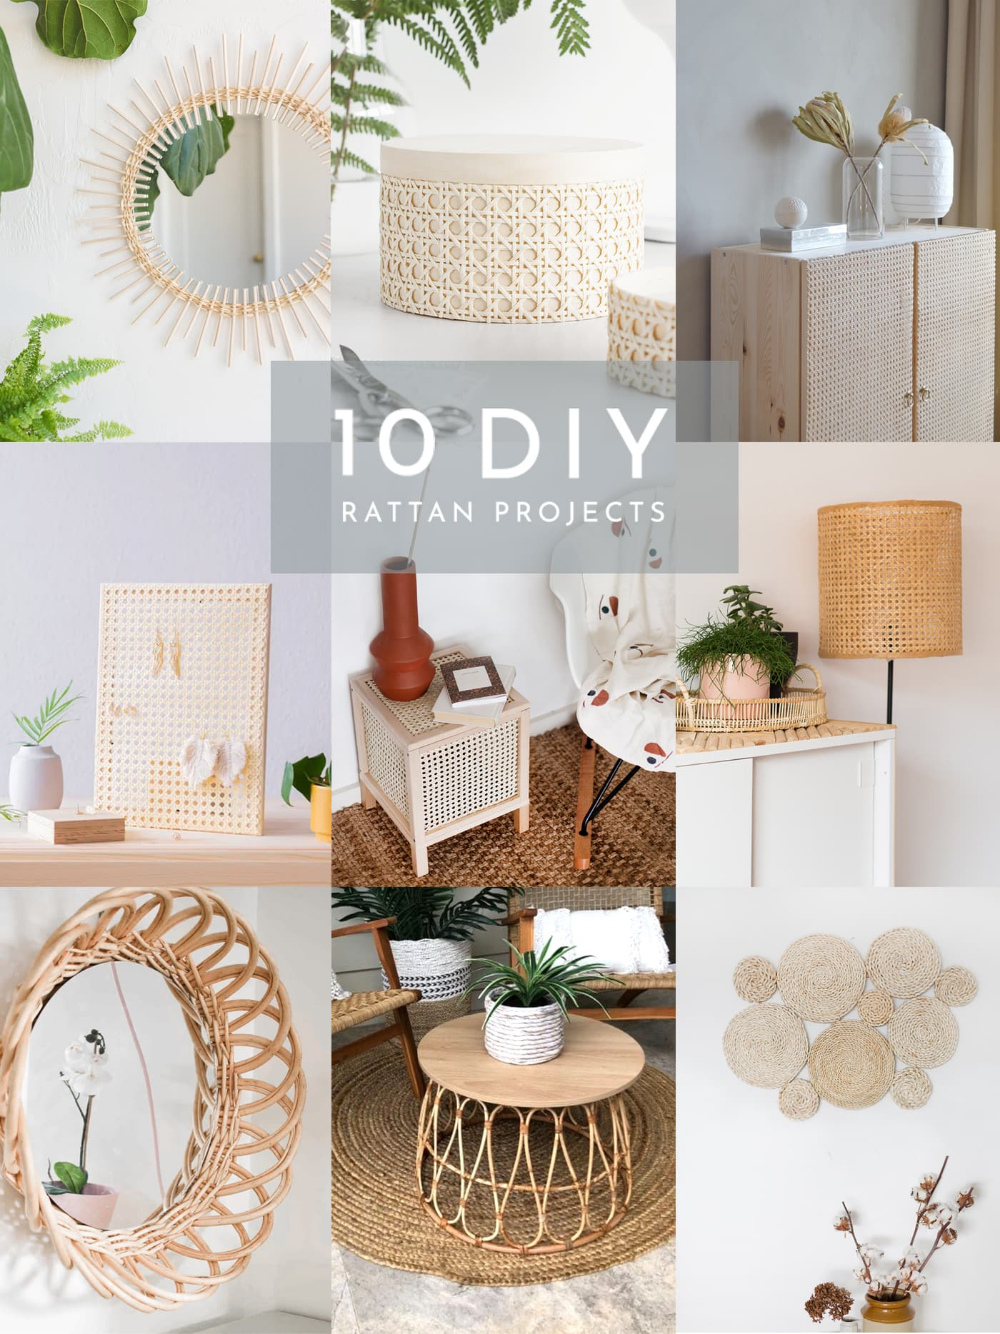 10 DIY Rattan Projects To Try | The Lovely Drawer - 10 DIY Rattan Projects To Try | The Lovely Drawer -   18 diy Dco facile ideas